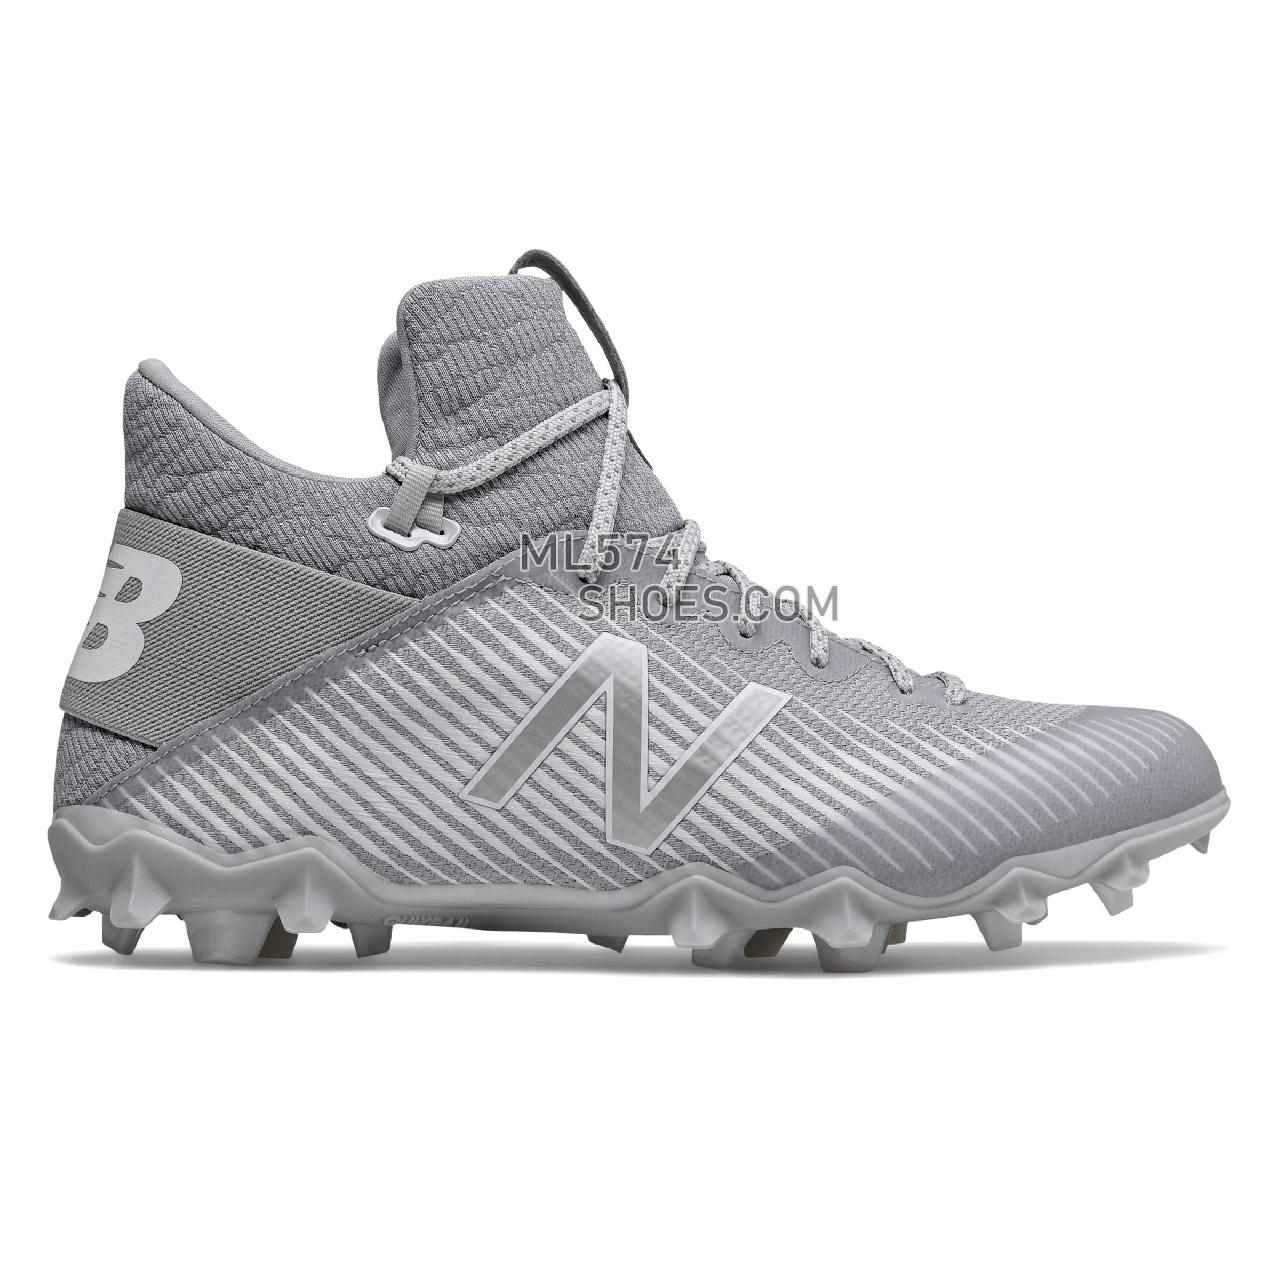 New Balance FreezeLX 2.0 - Men's Turf And Lacrosse Cleats - Grey with White - FREEZGW2